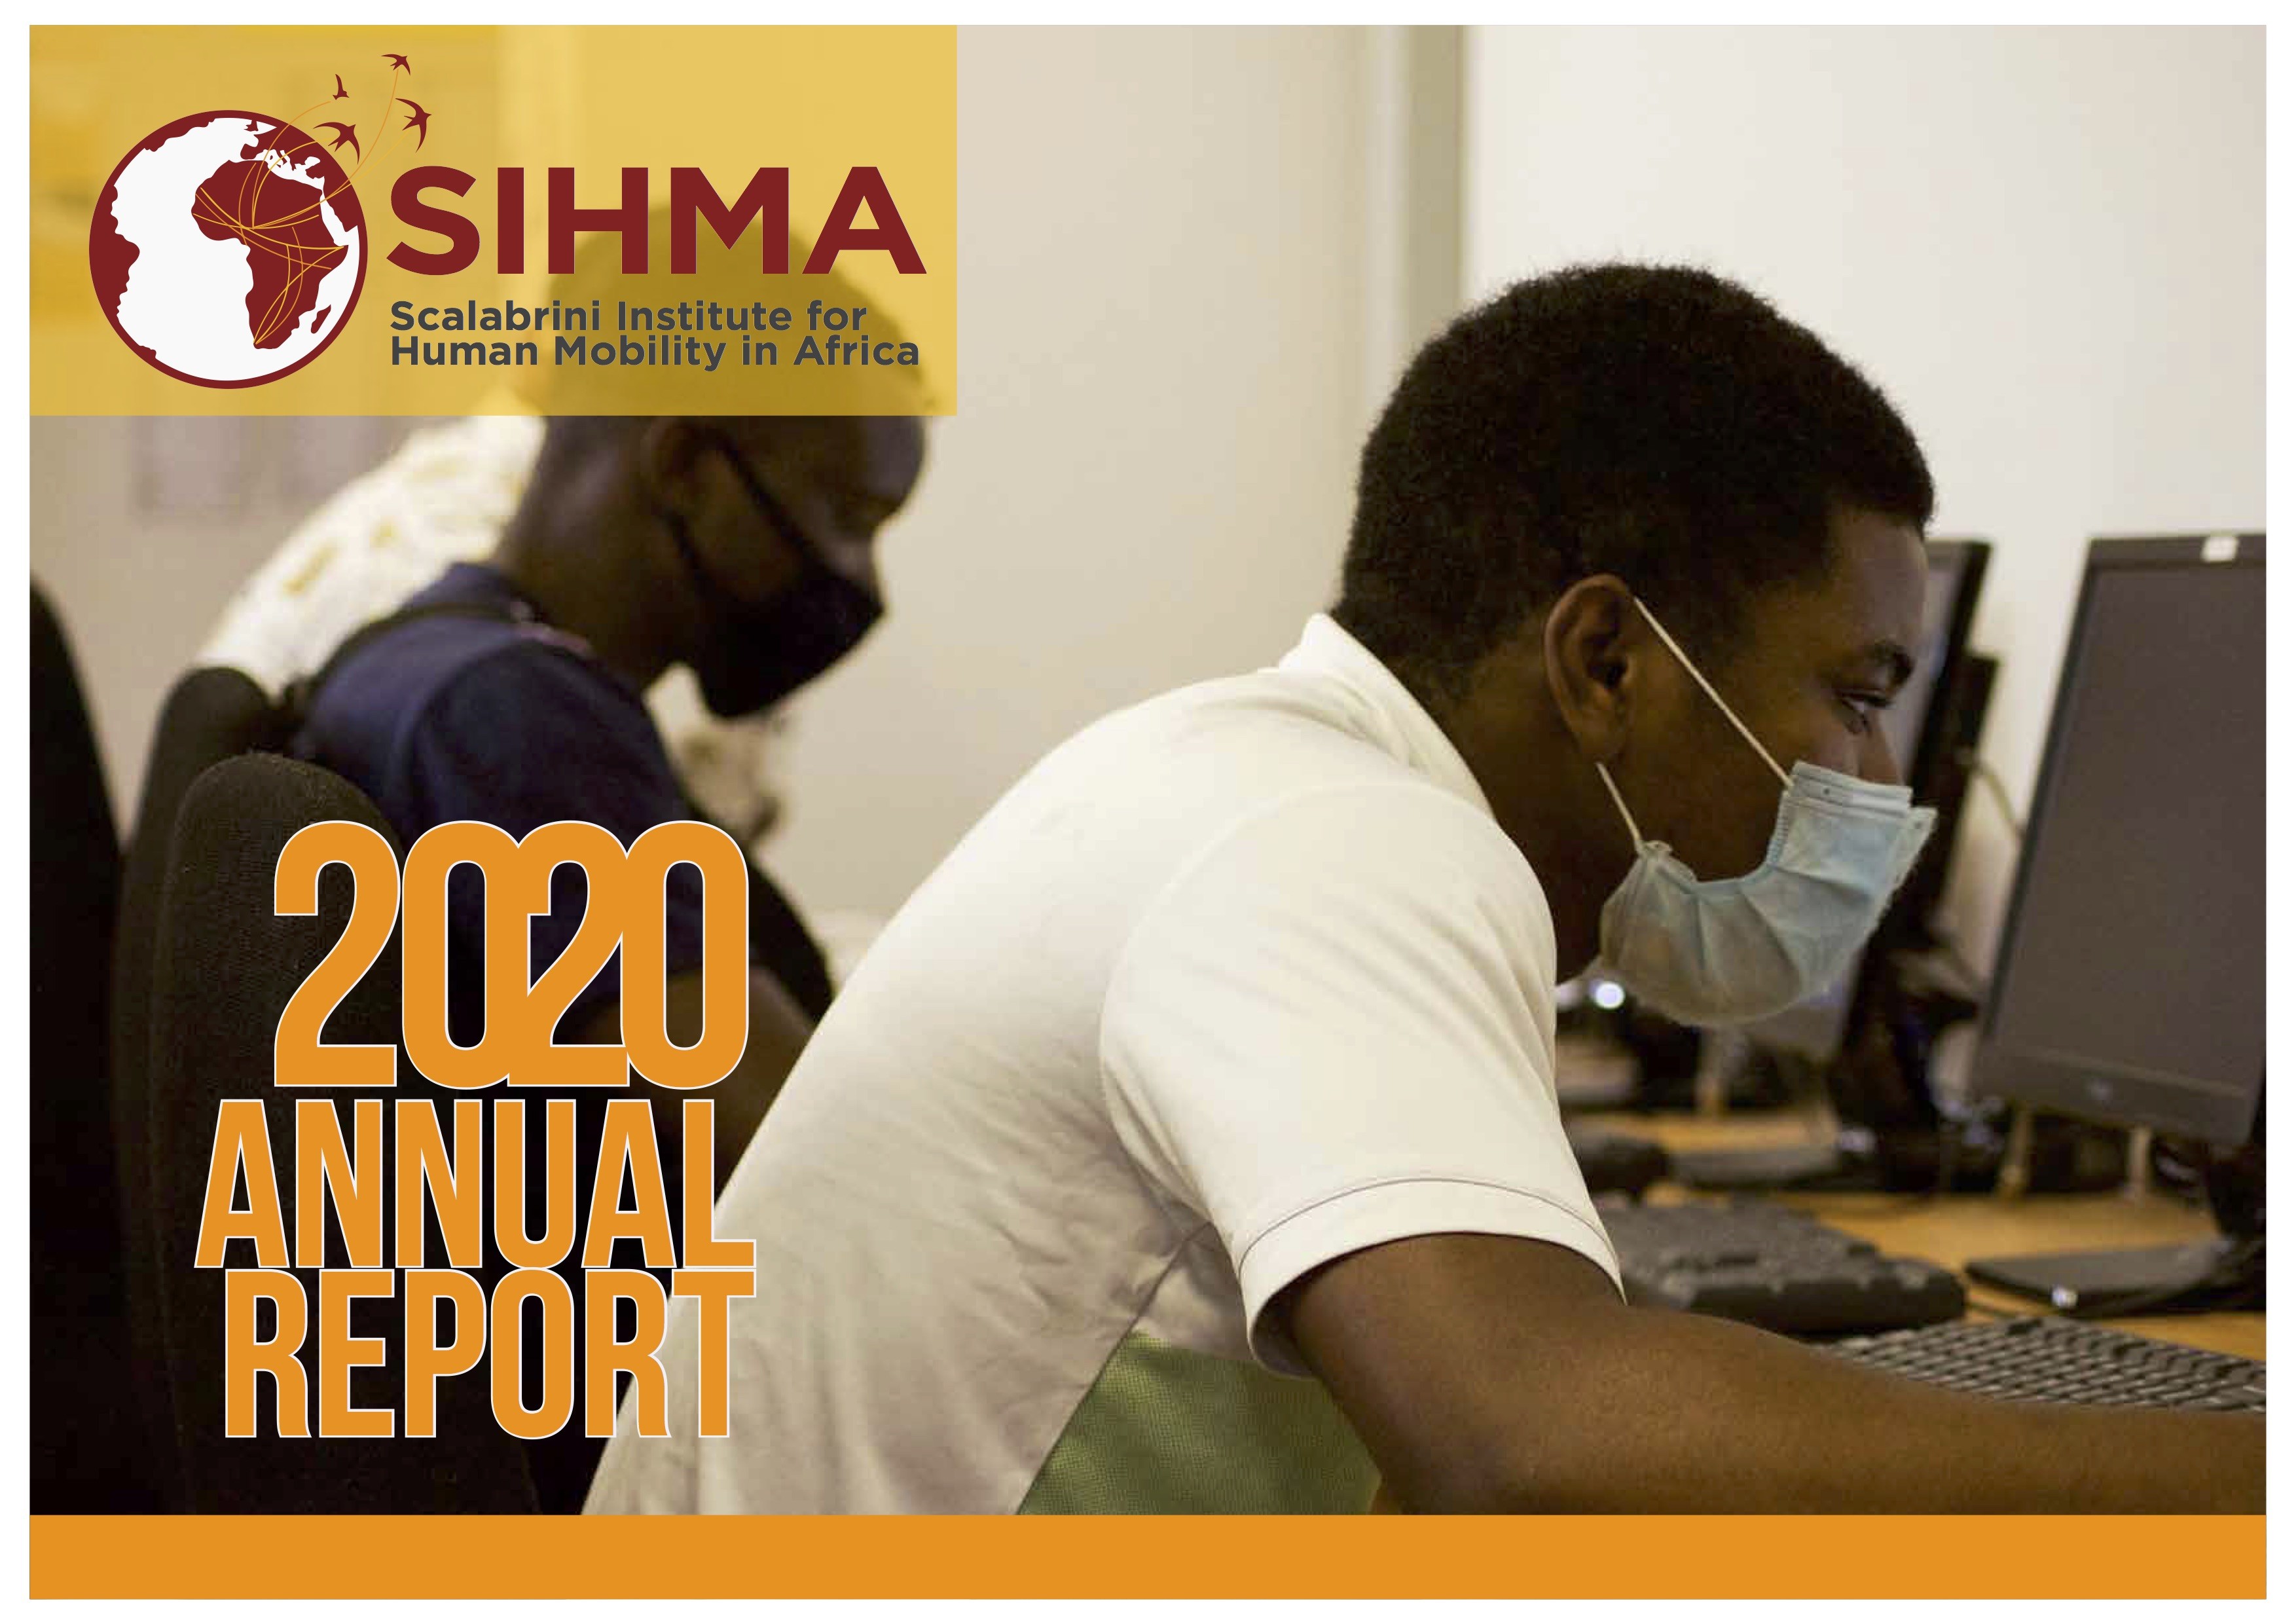 https://www.sihma.org.za/photos/shares/SIHMA Annual Report 2020-21 cover.jpg